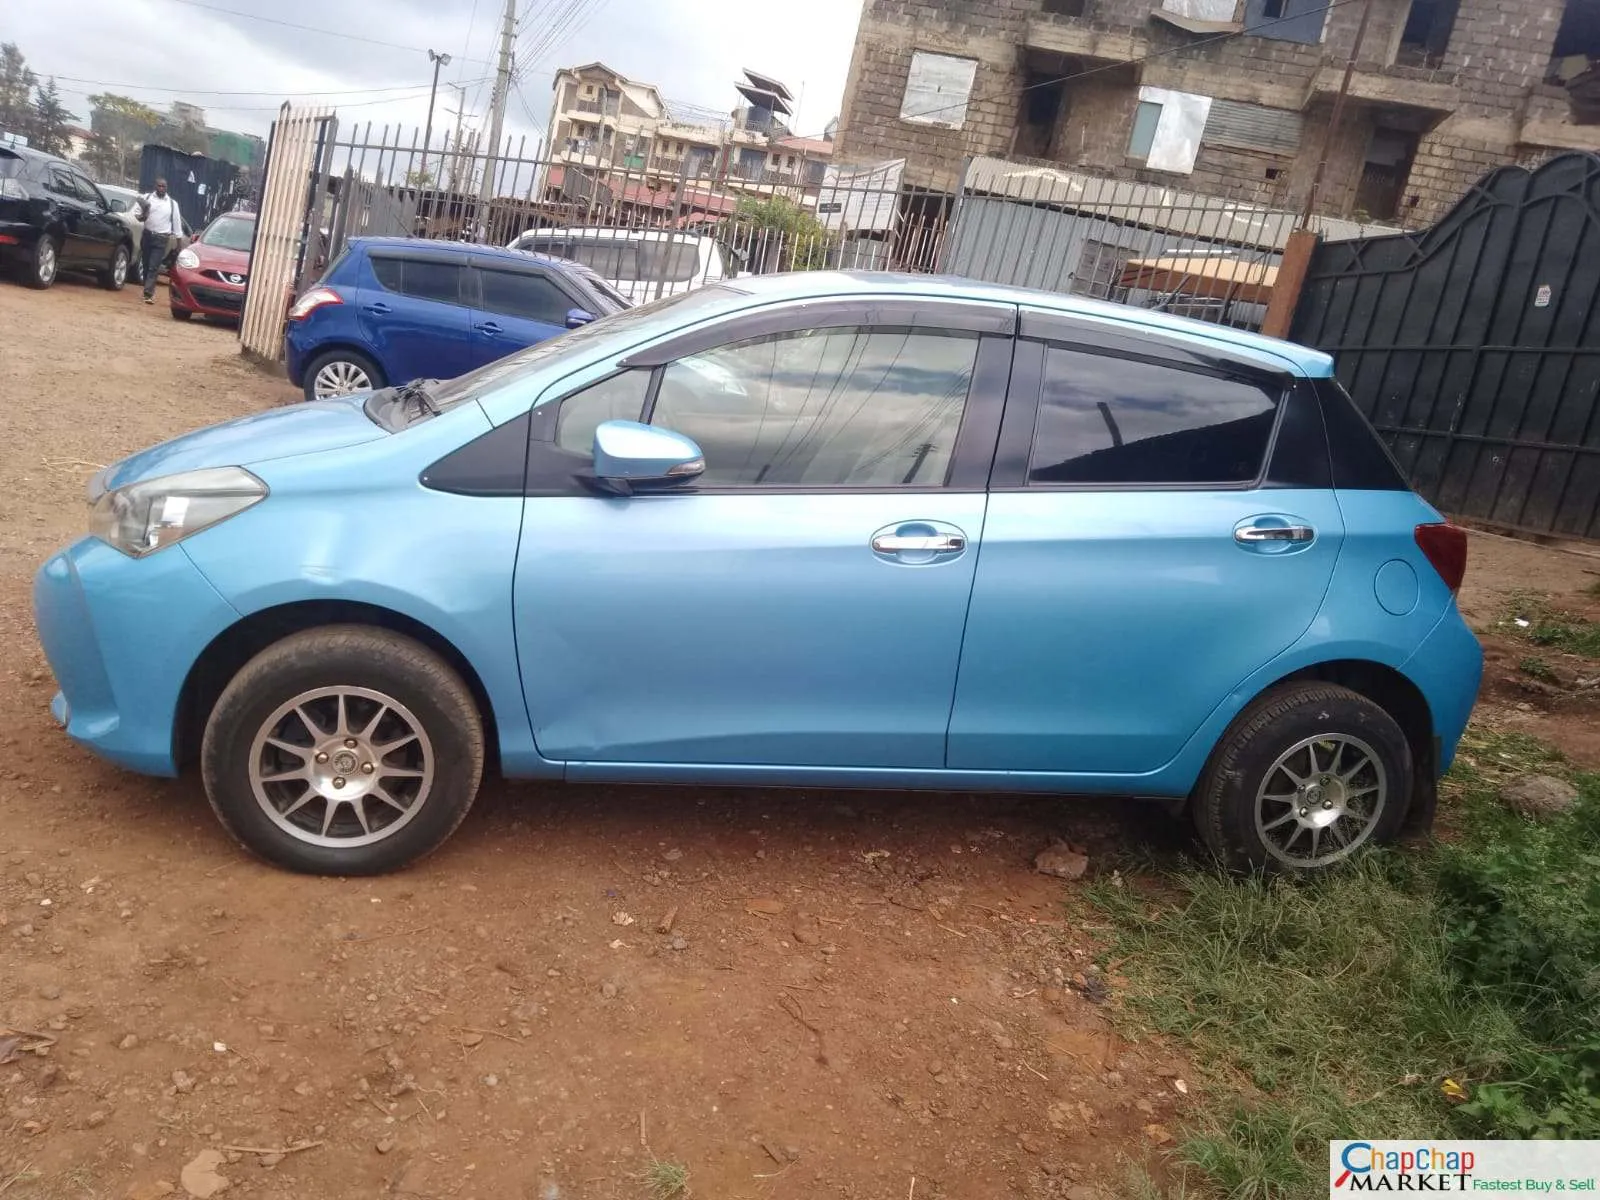 Cars Cars For Sale-Toyota Vitz kenya 1300cc You Pay 30% Deposit Trade in OK EXCLUSIVE vitz for sale in kenya hire purchase installments 4